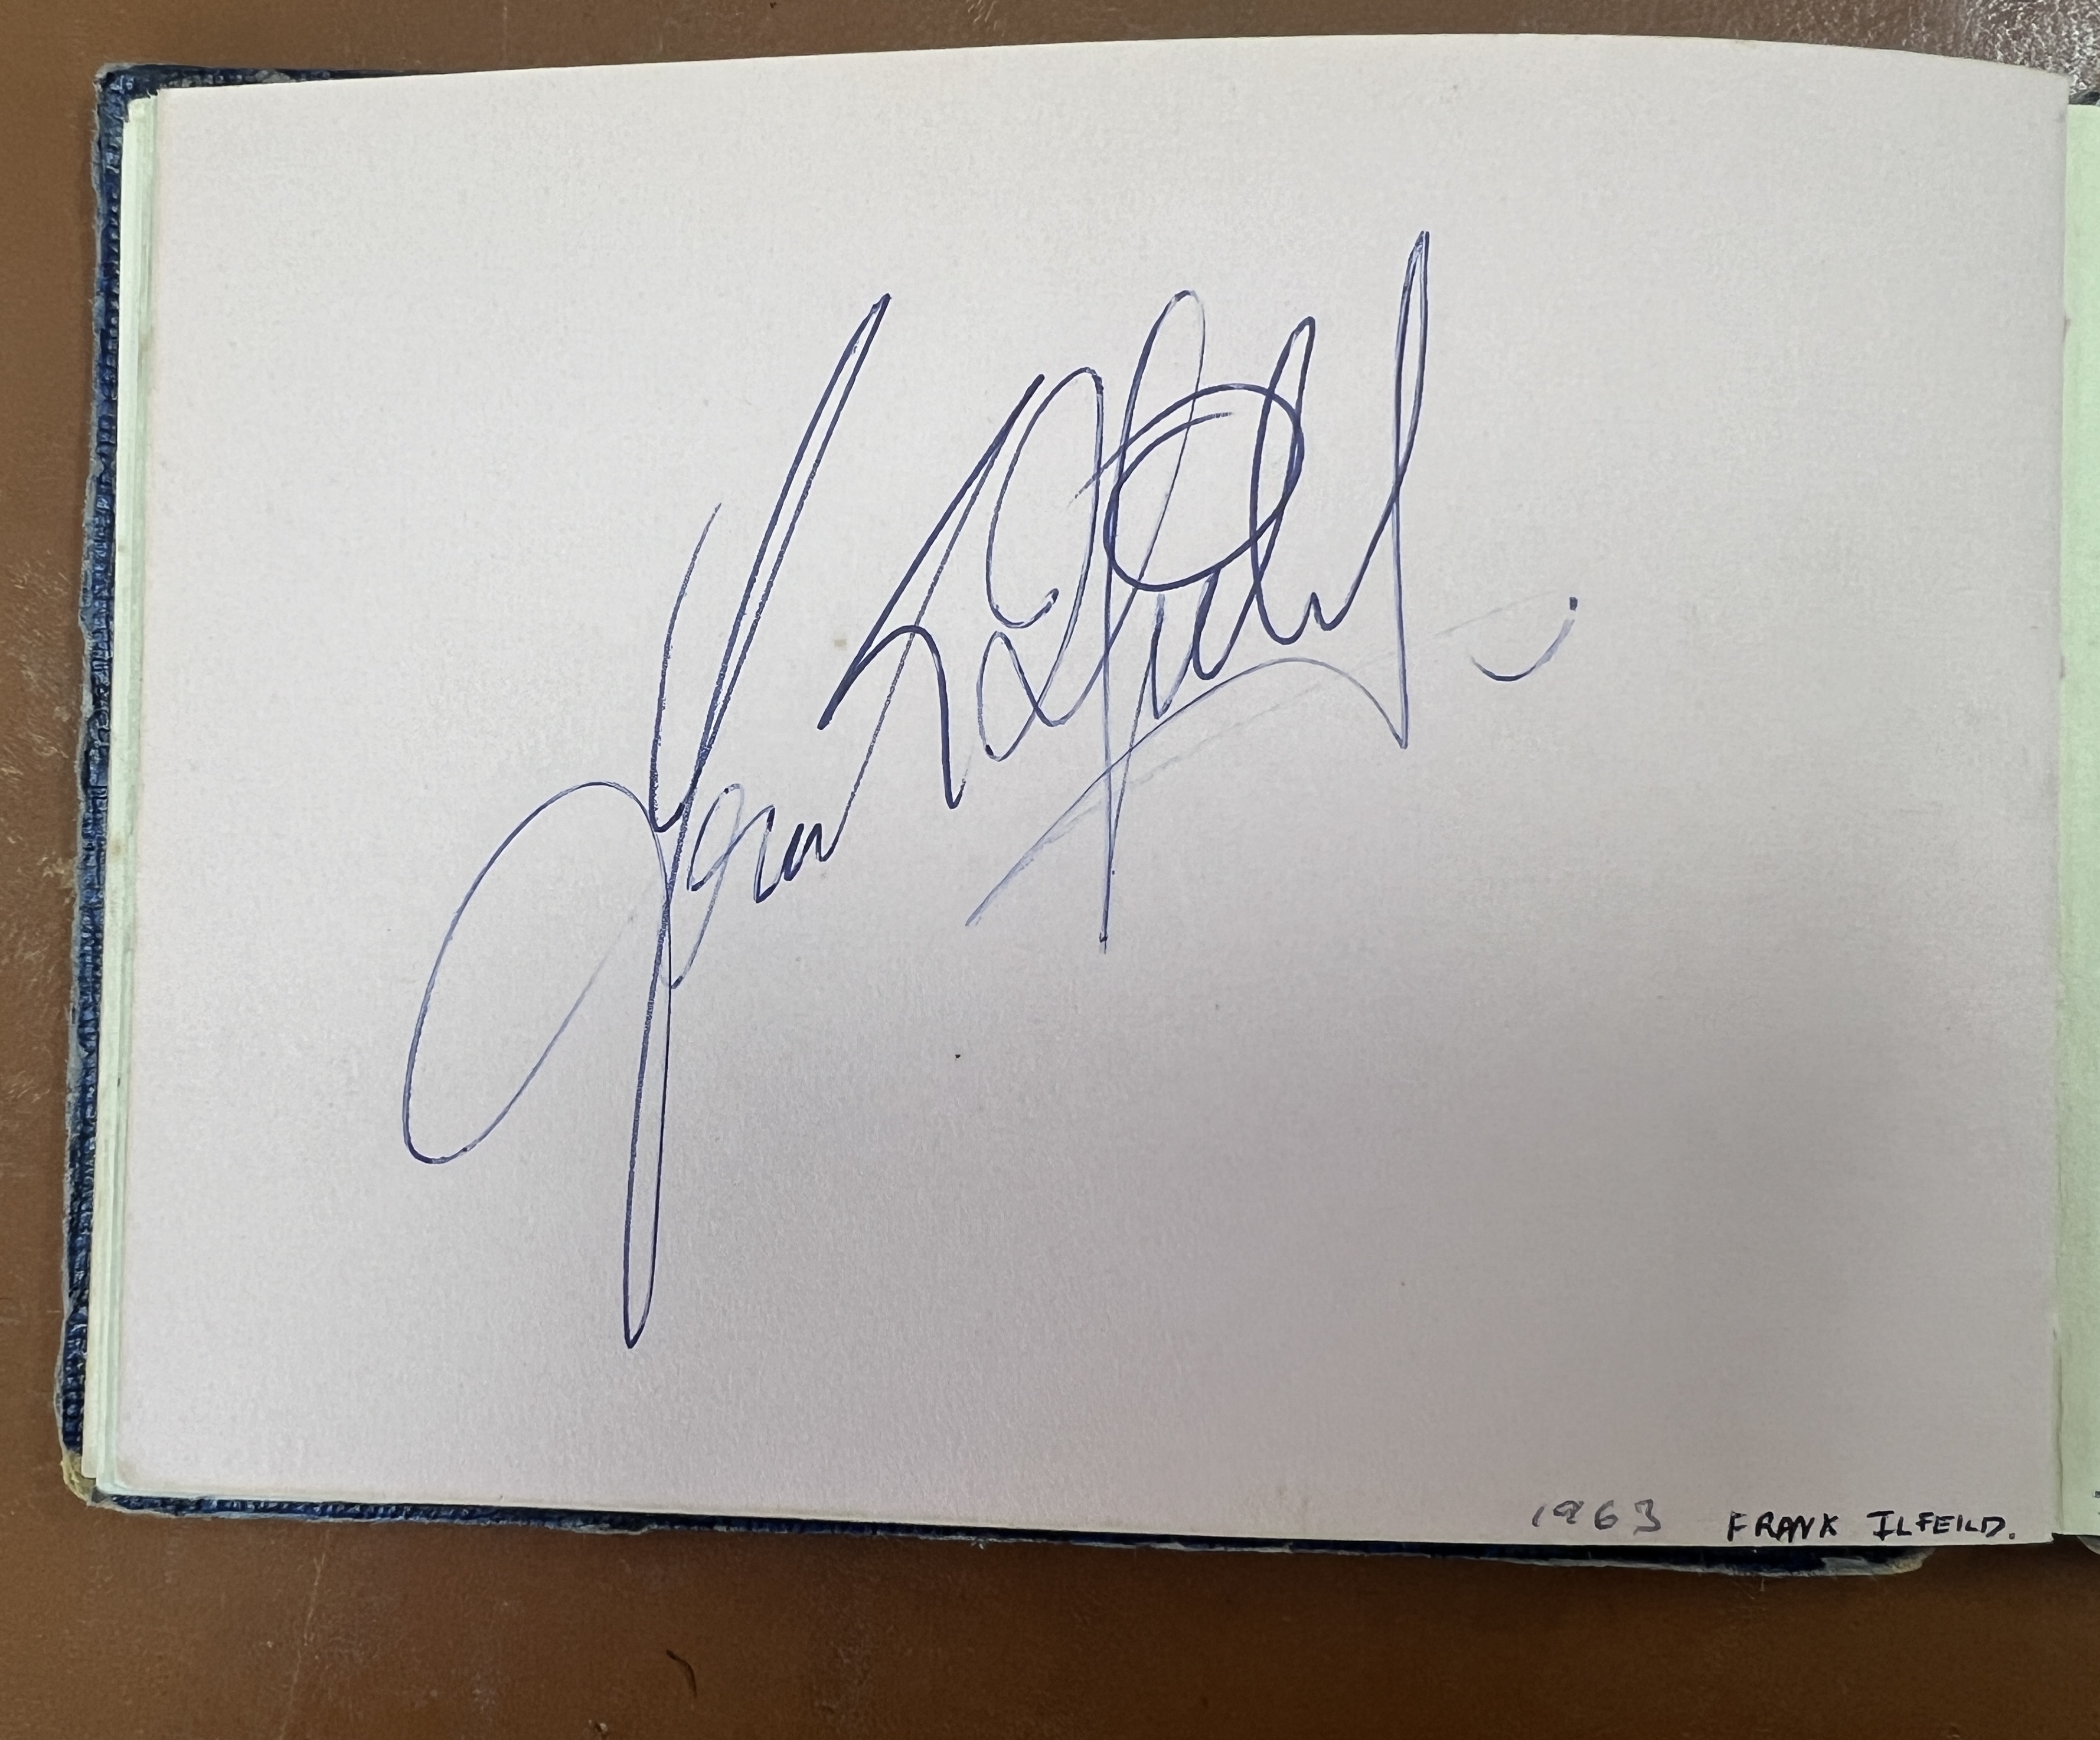 A 1960's autograph album containing autographs of various celebrities including Cliff Richard - Image 37 of 37